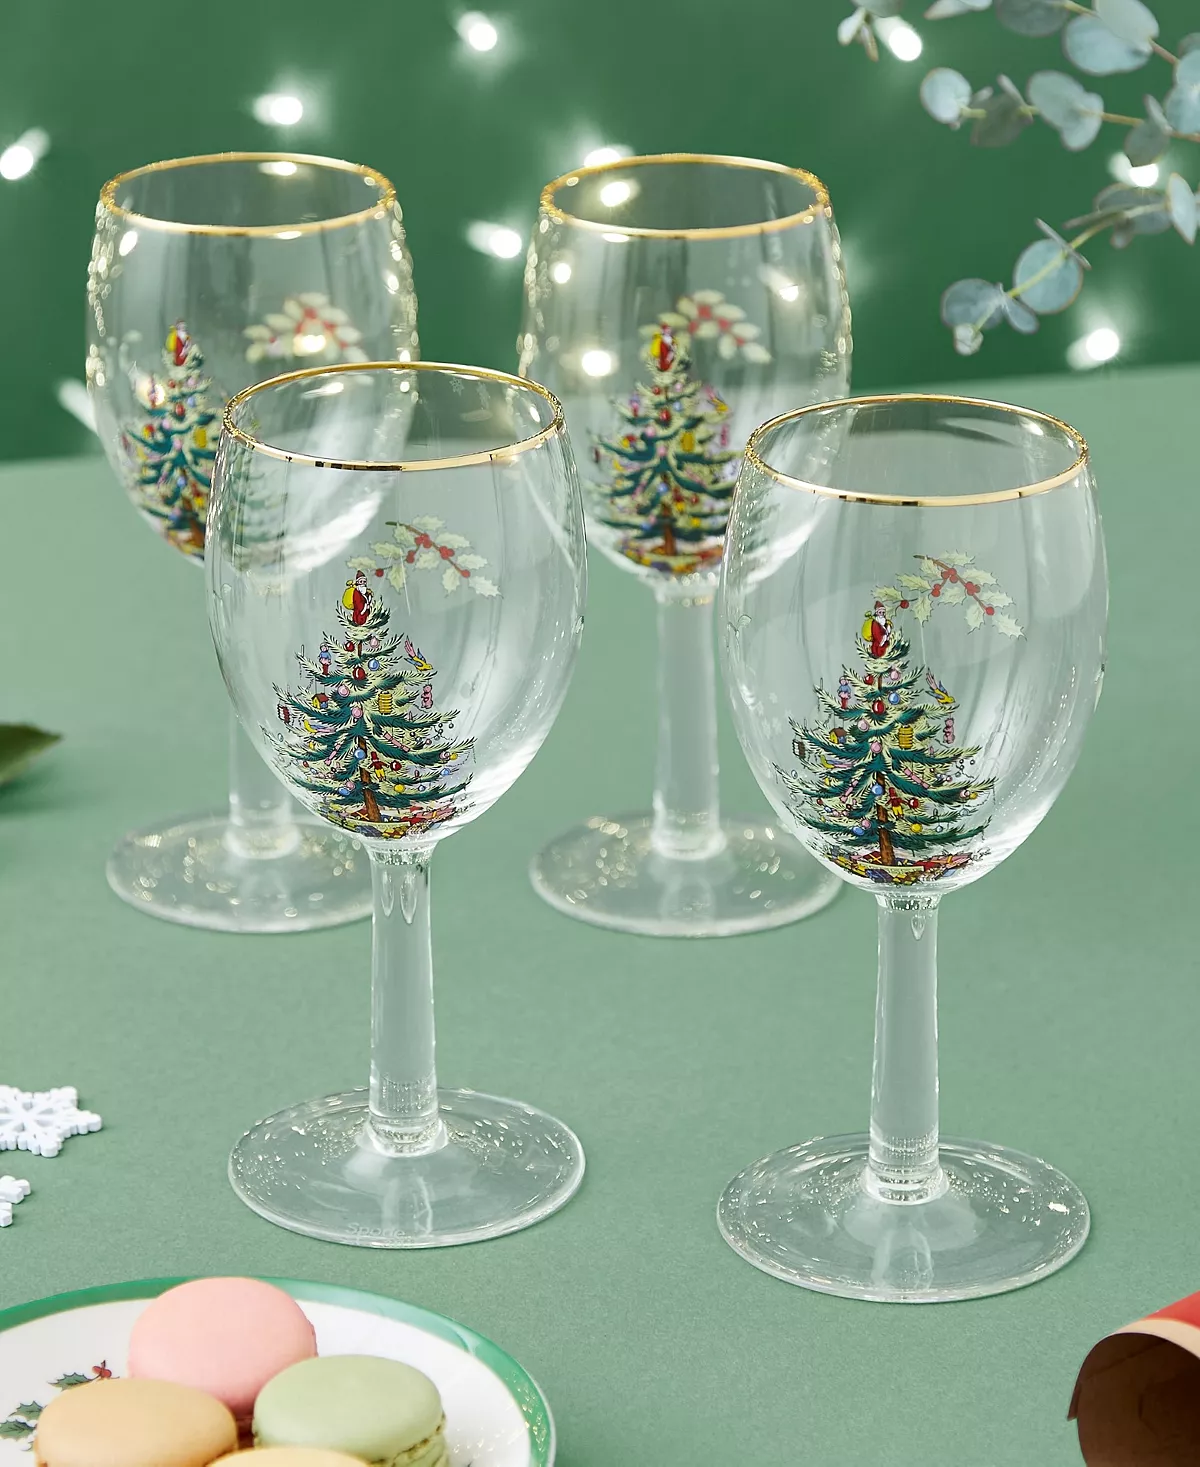 Set of four stemmed wine glasses featuring painted Christmas Trees